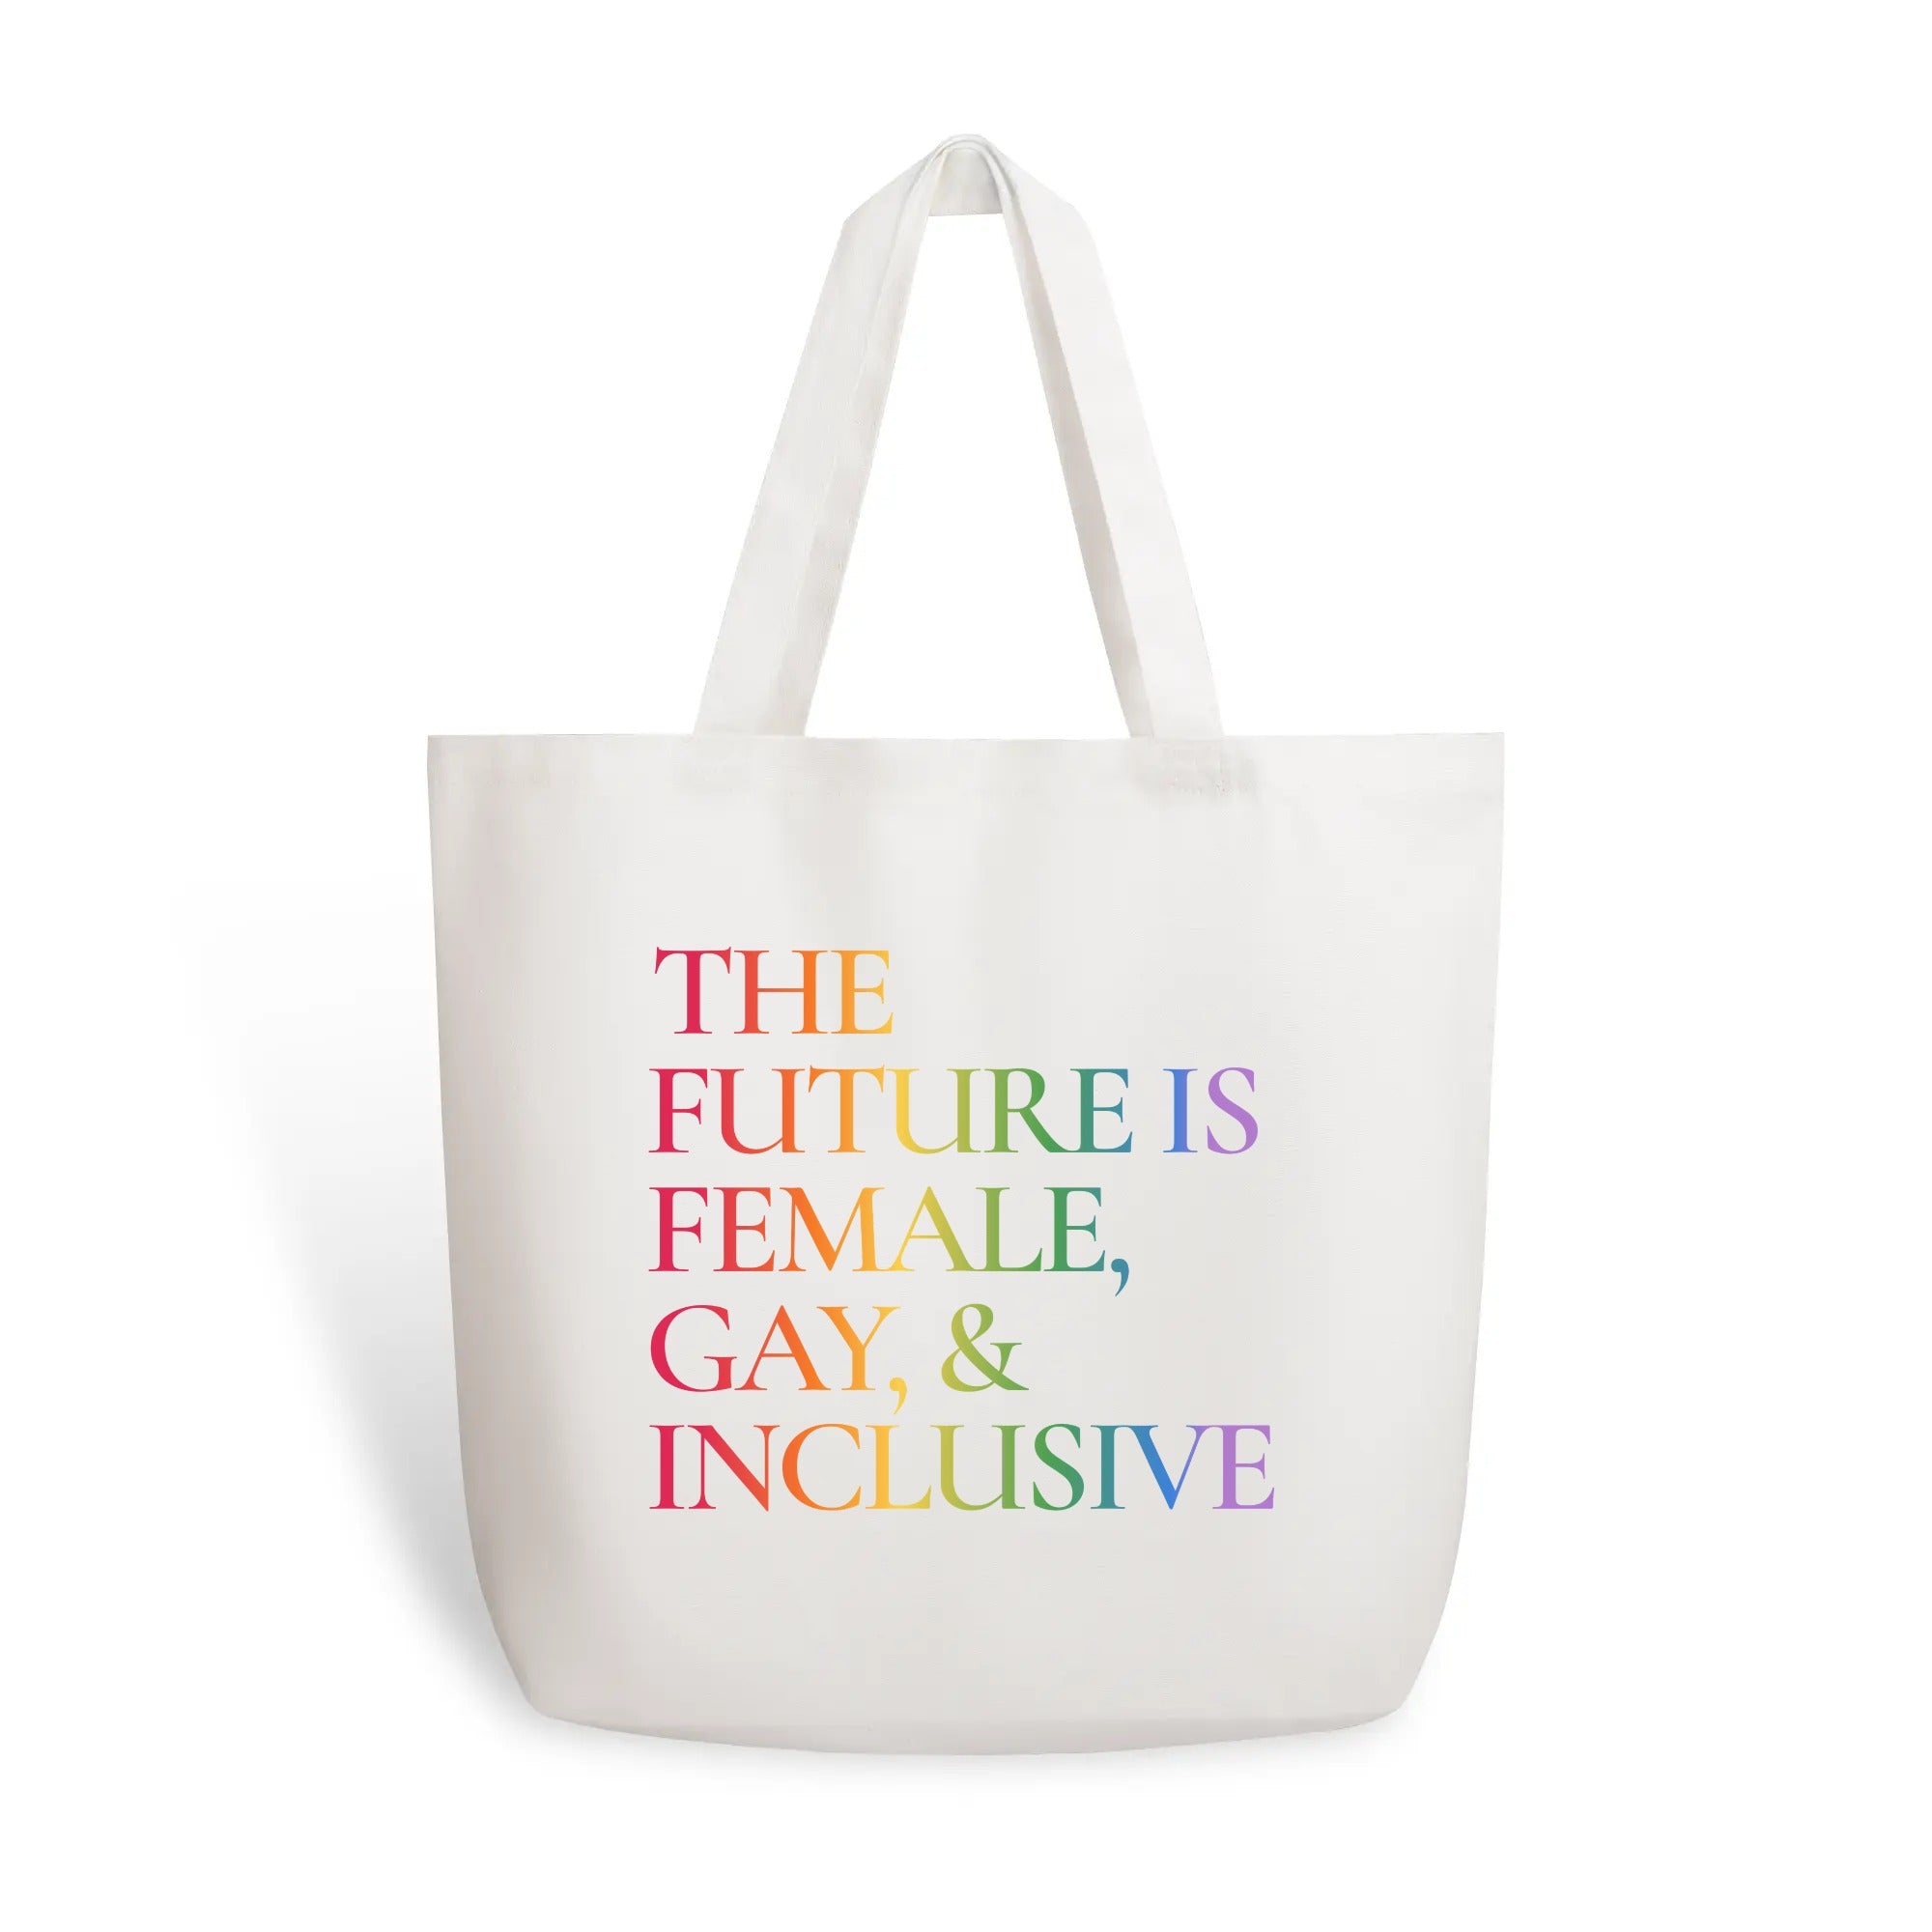 The future is Female, Gay & Inclusive Tote Bag